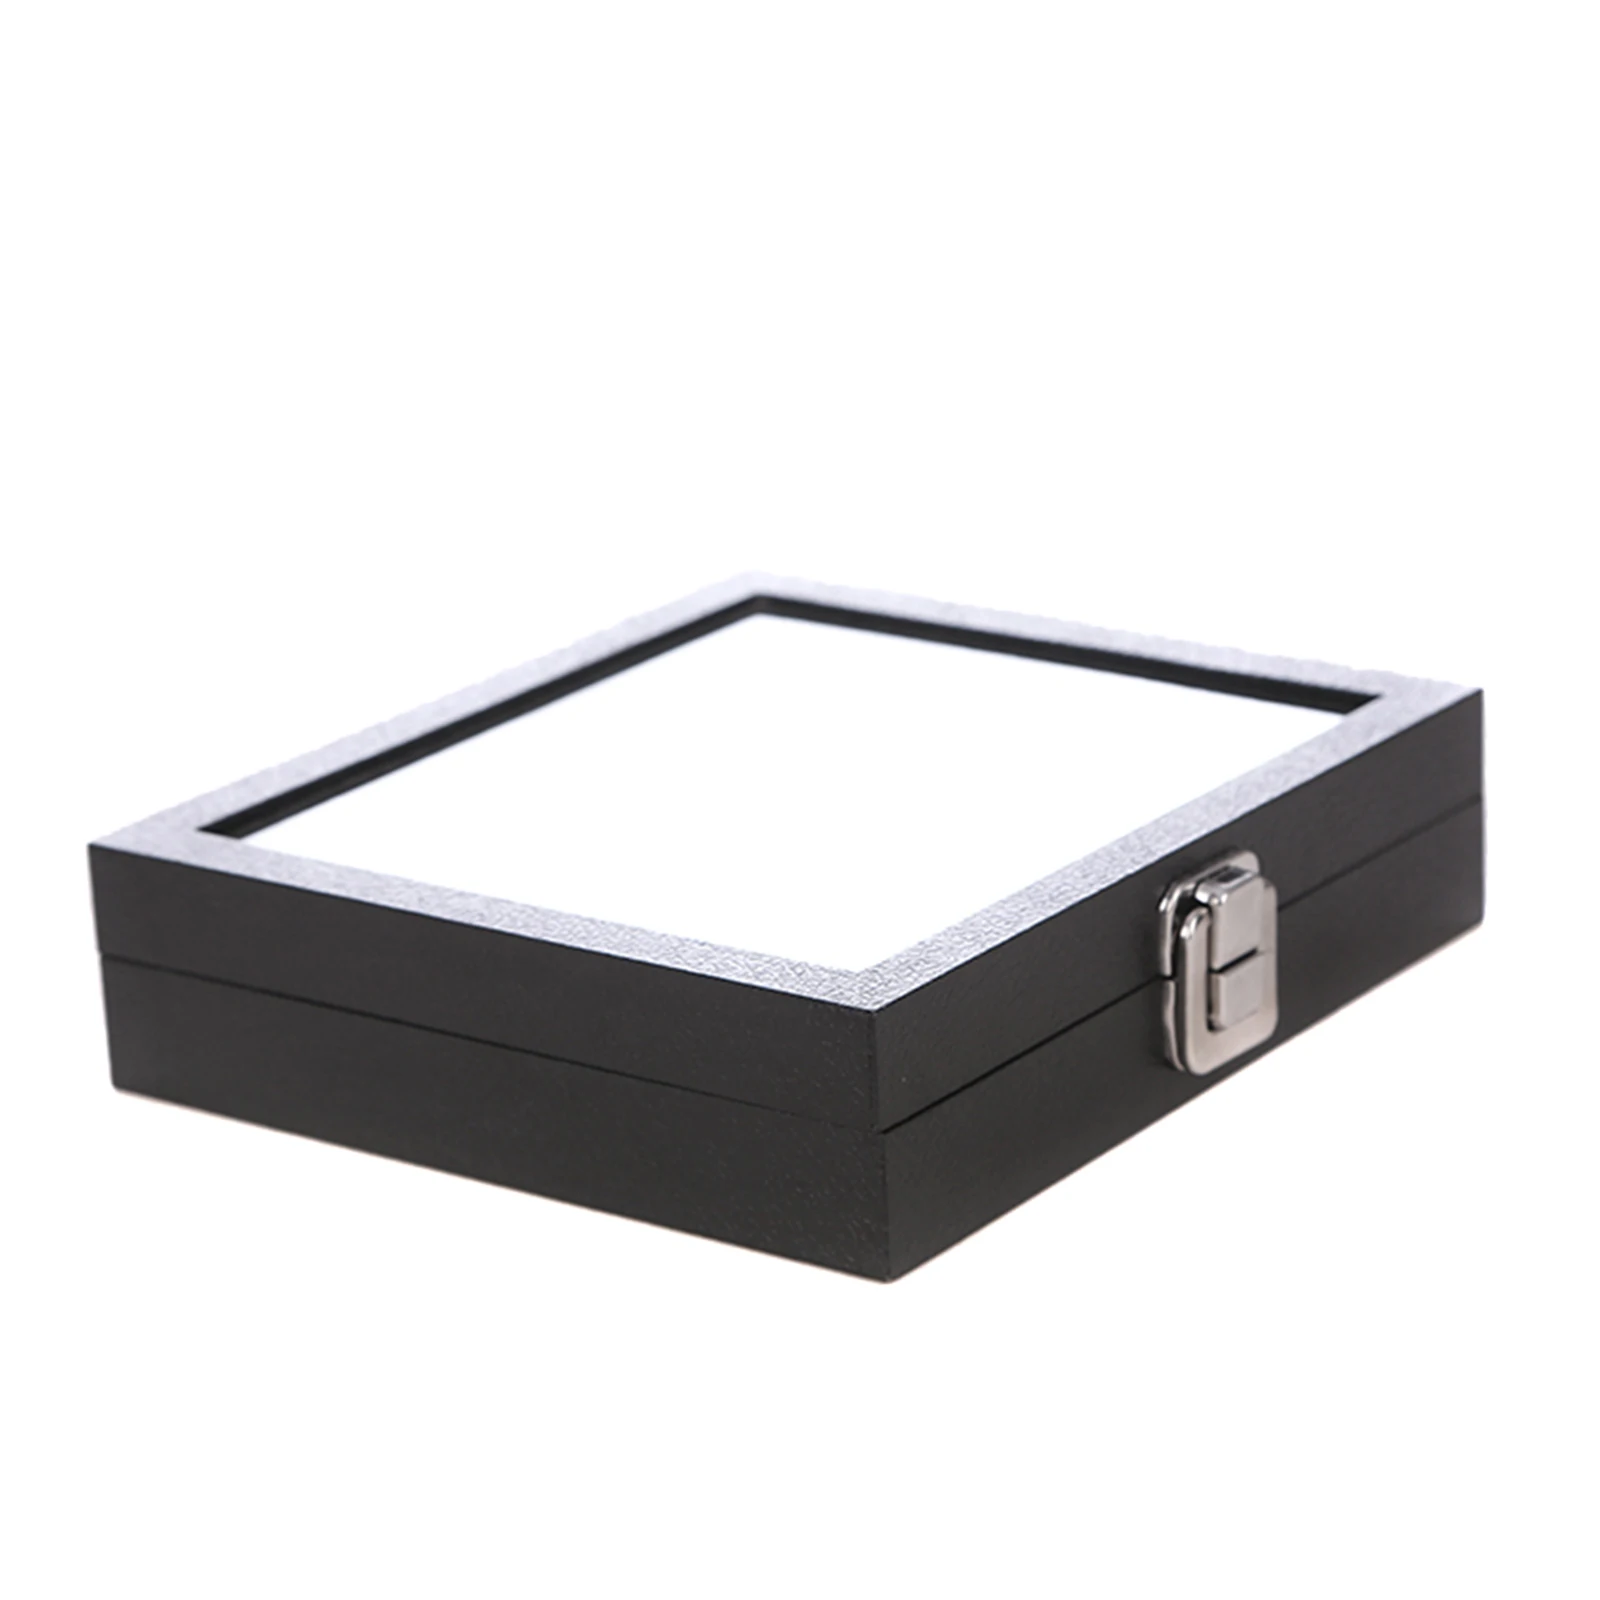 36 Slot Black Rings Display Box Jewelry Storage Case Holder Showcase Rings Cufflink Jewelry Tray With Lid